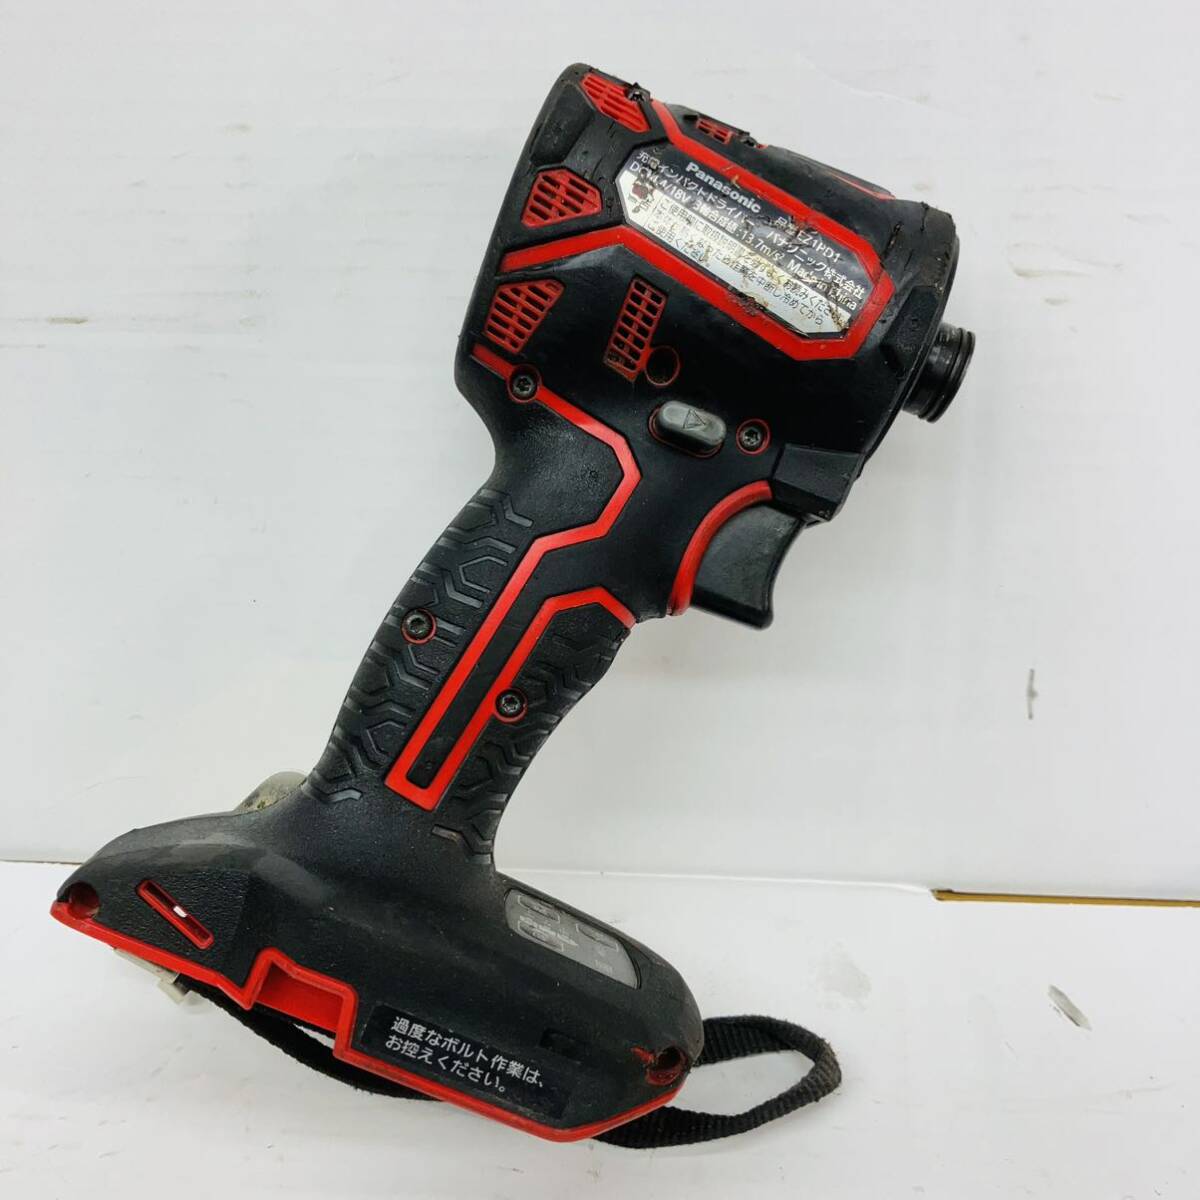  operation excellent free shipping Panasonic Panasonic 14.4v 18v rechargeable impact driver EXENA EZ1PD1 red body only 